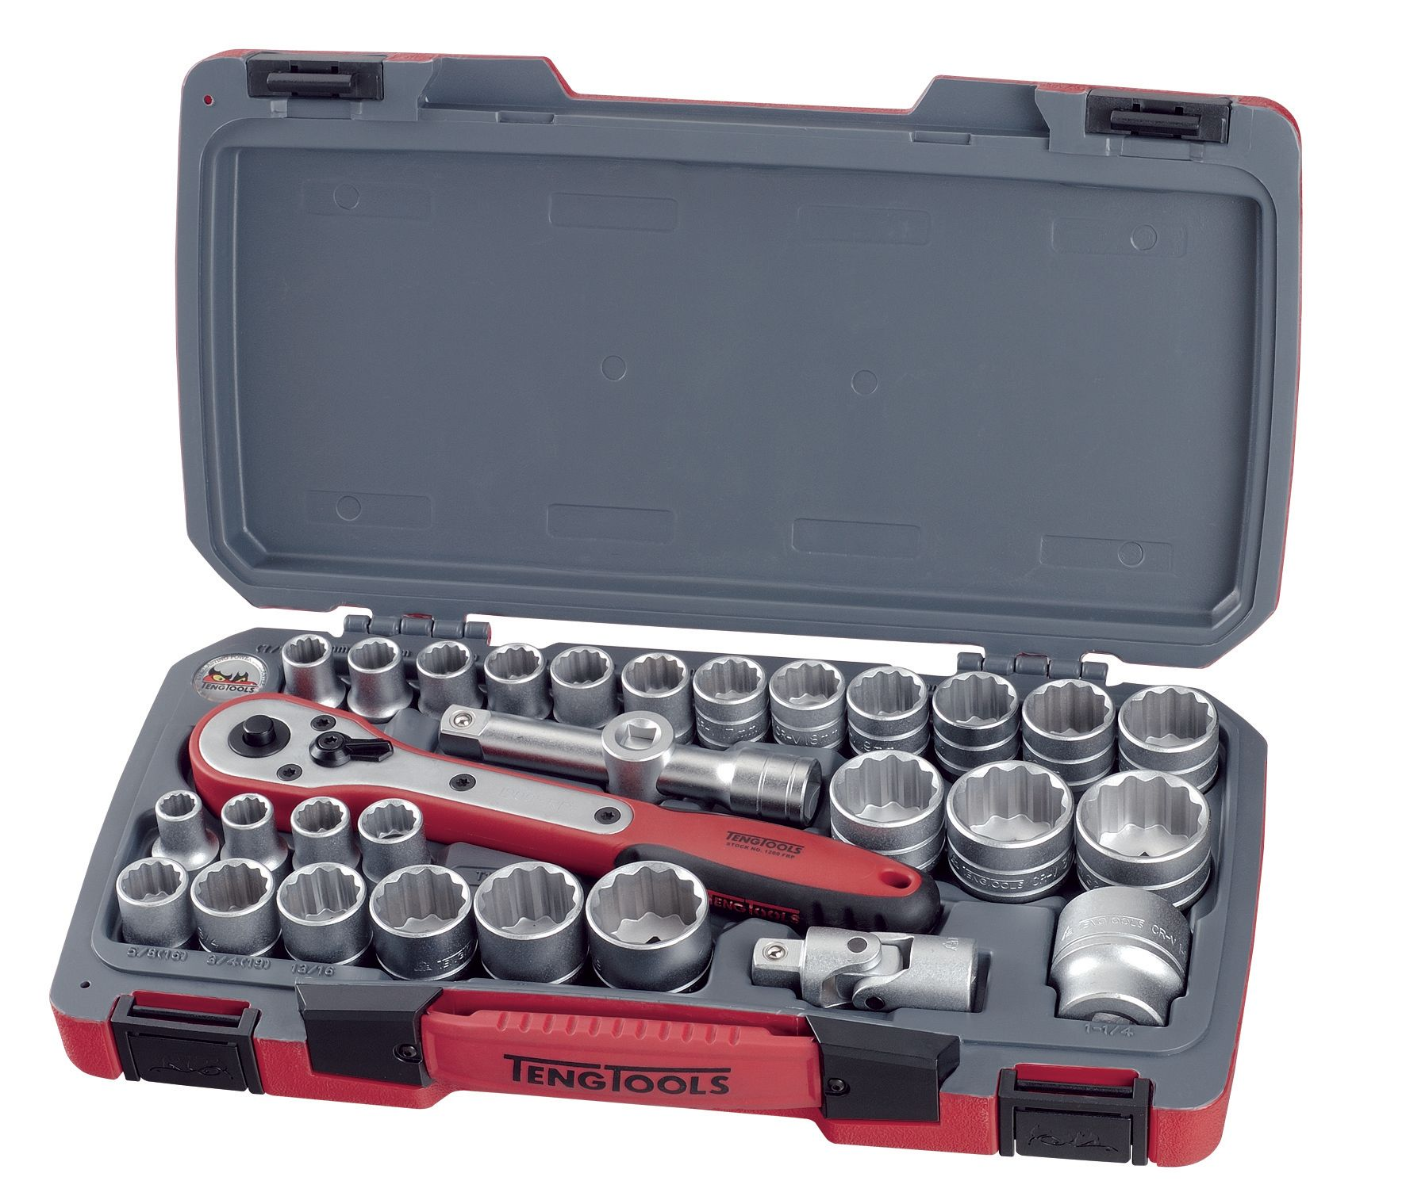 Teng Tools T1230 30 Piece 1/2" Drive 12 point Socket Set in storage case